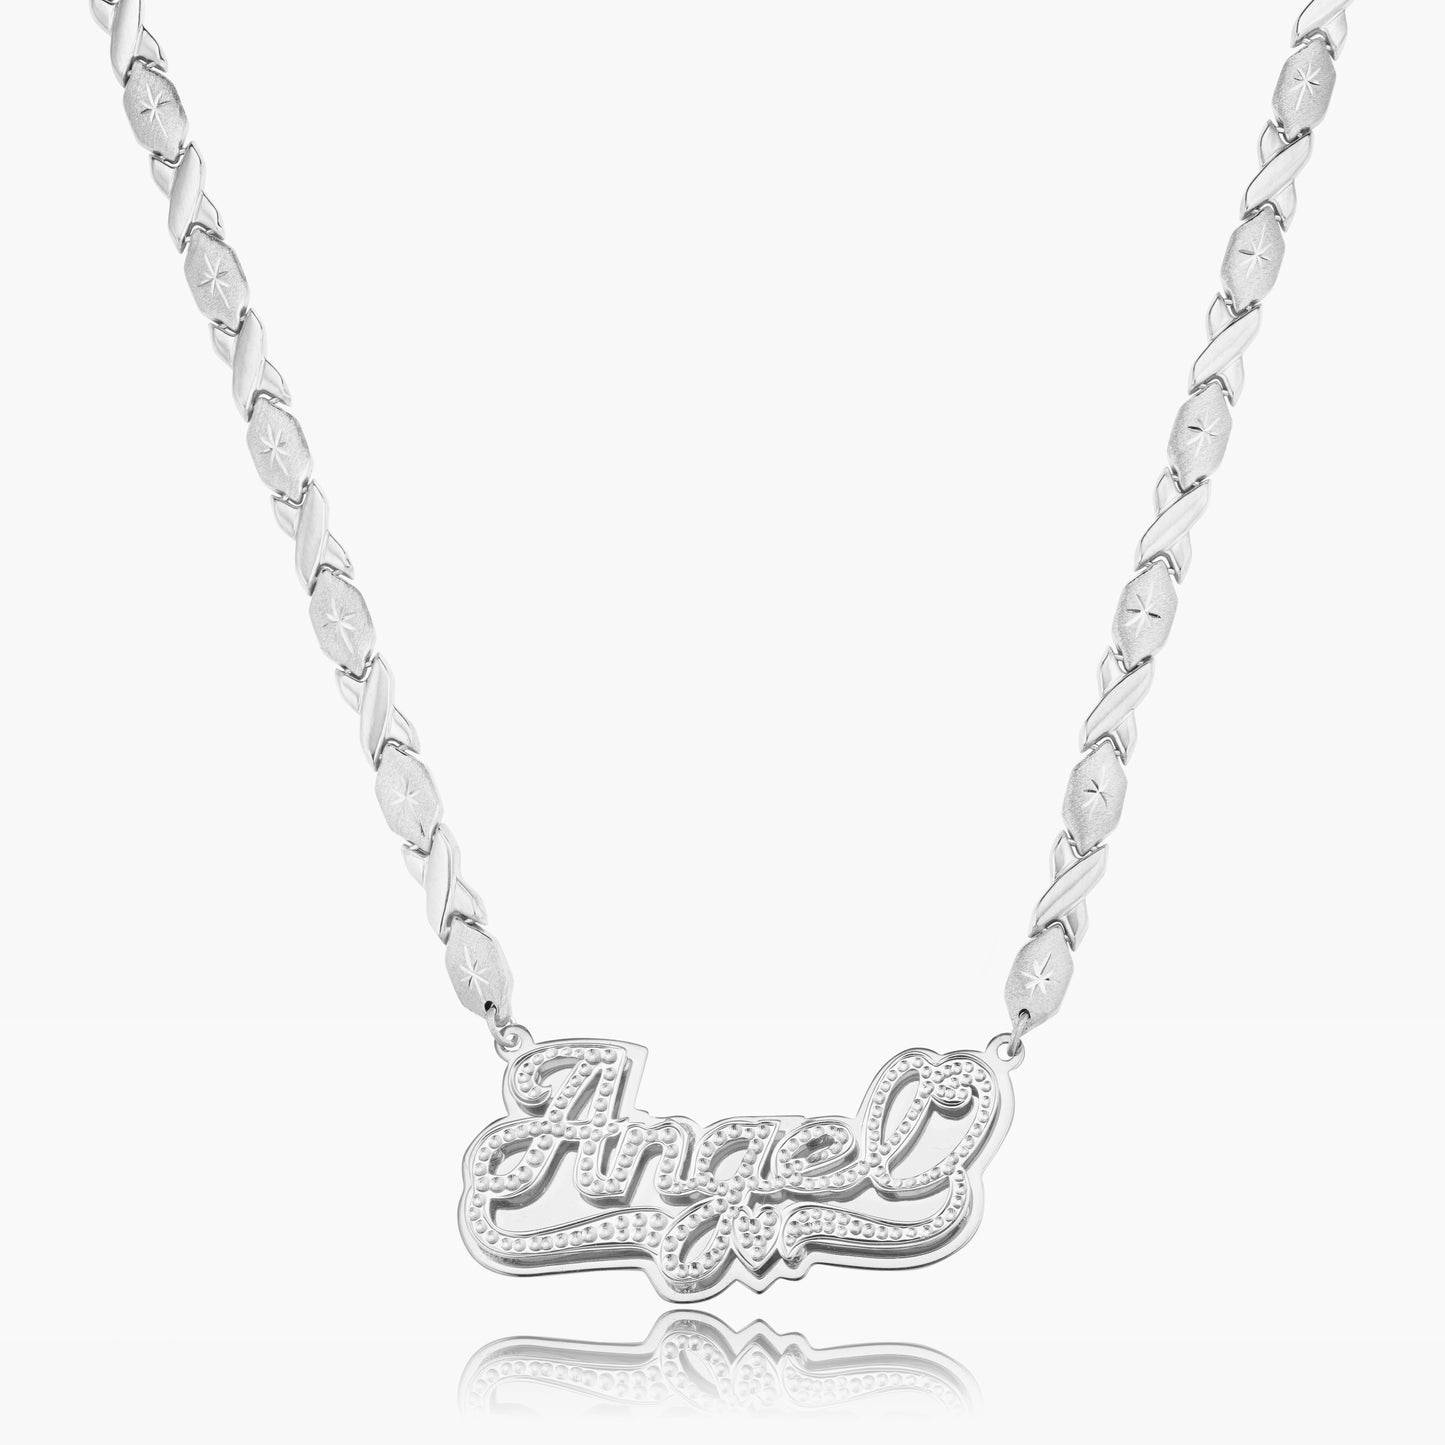 Kid's Double Plated Name Necklace W/ Xo Chain